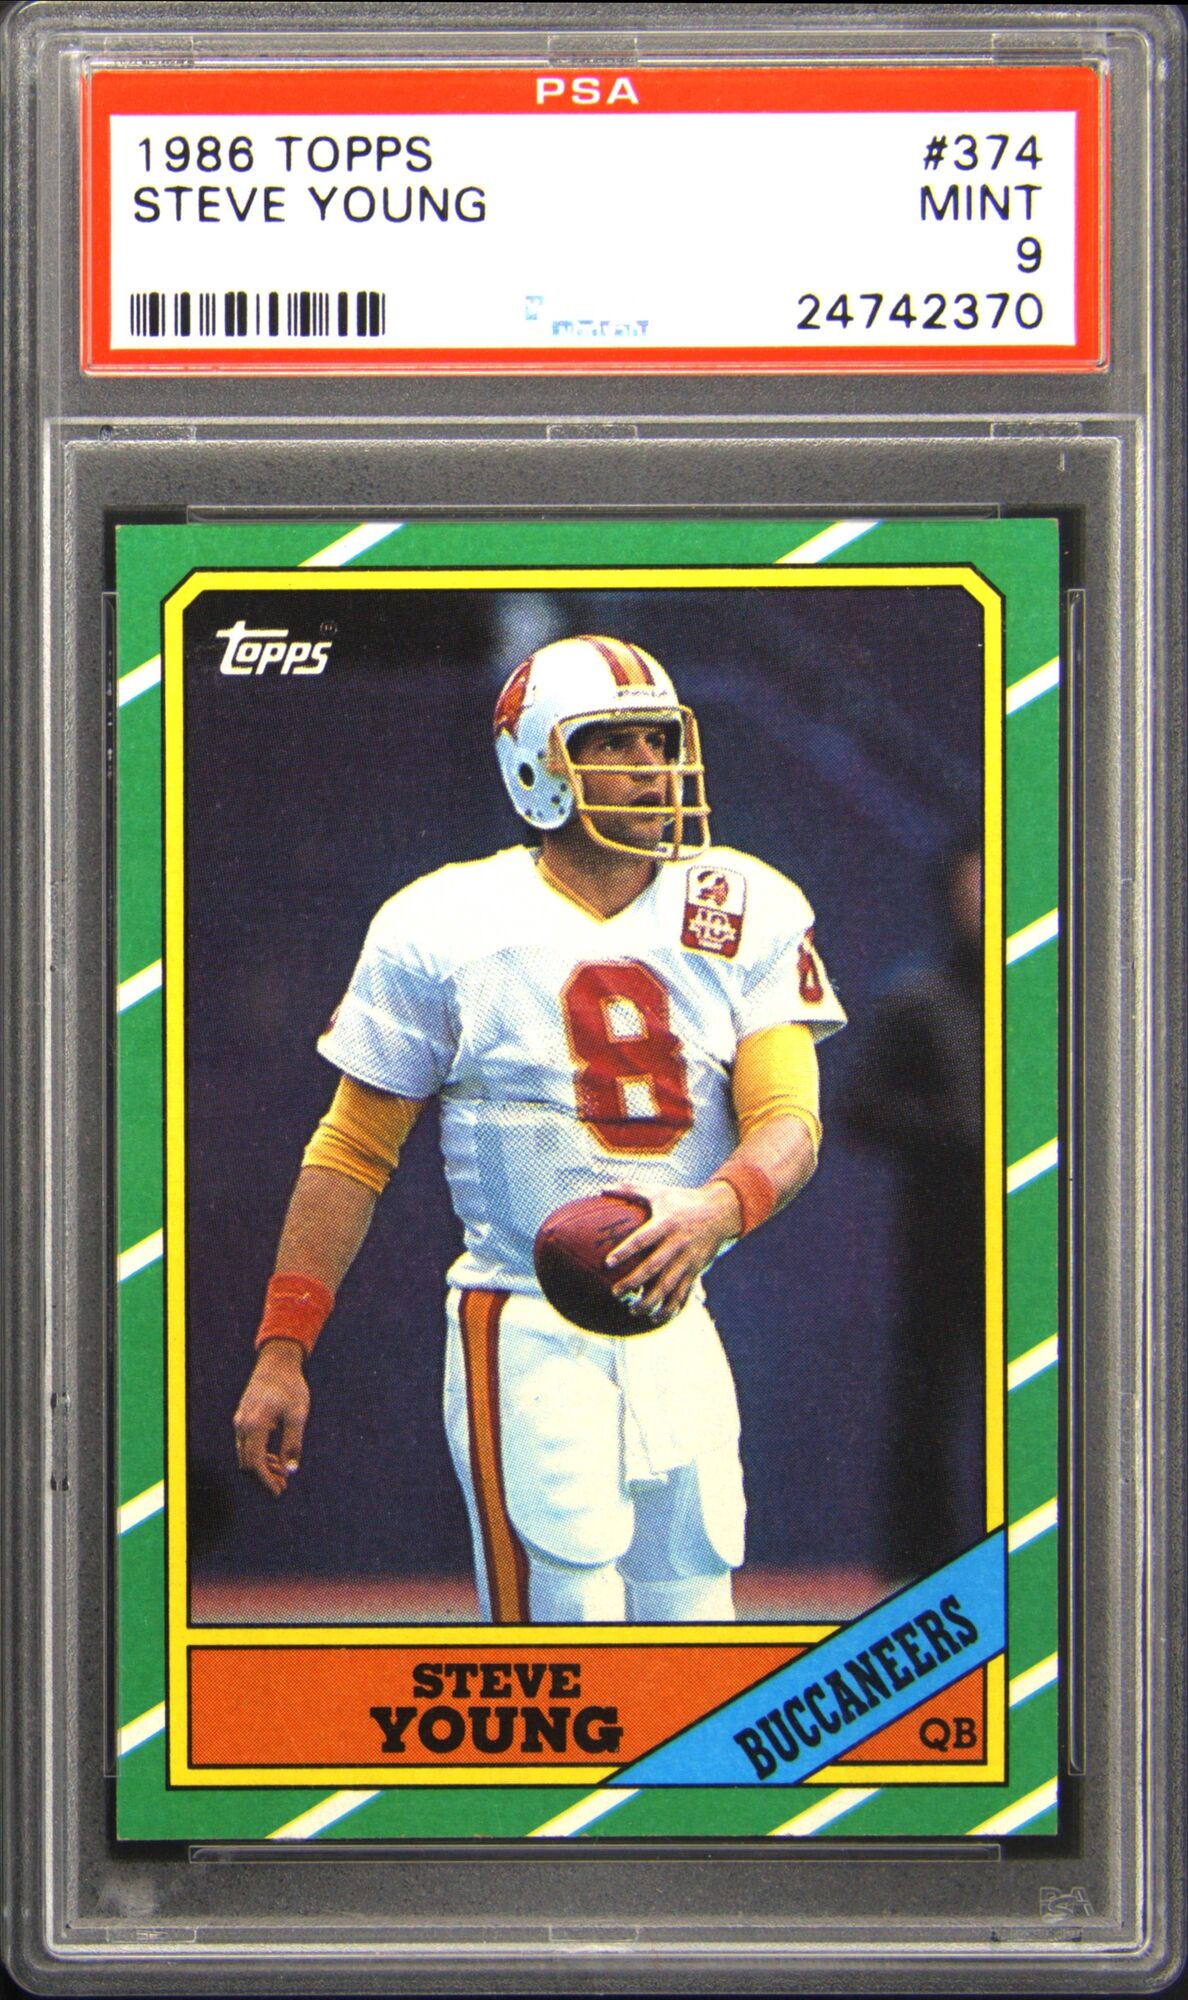 1986 Topps Steve Young PSA 9 Rookie